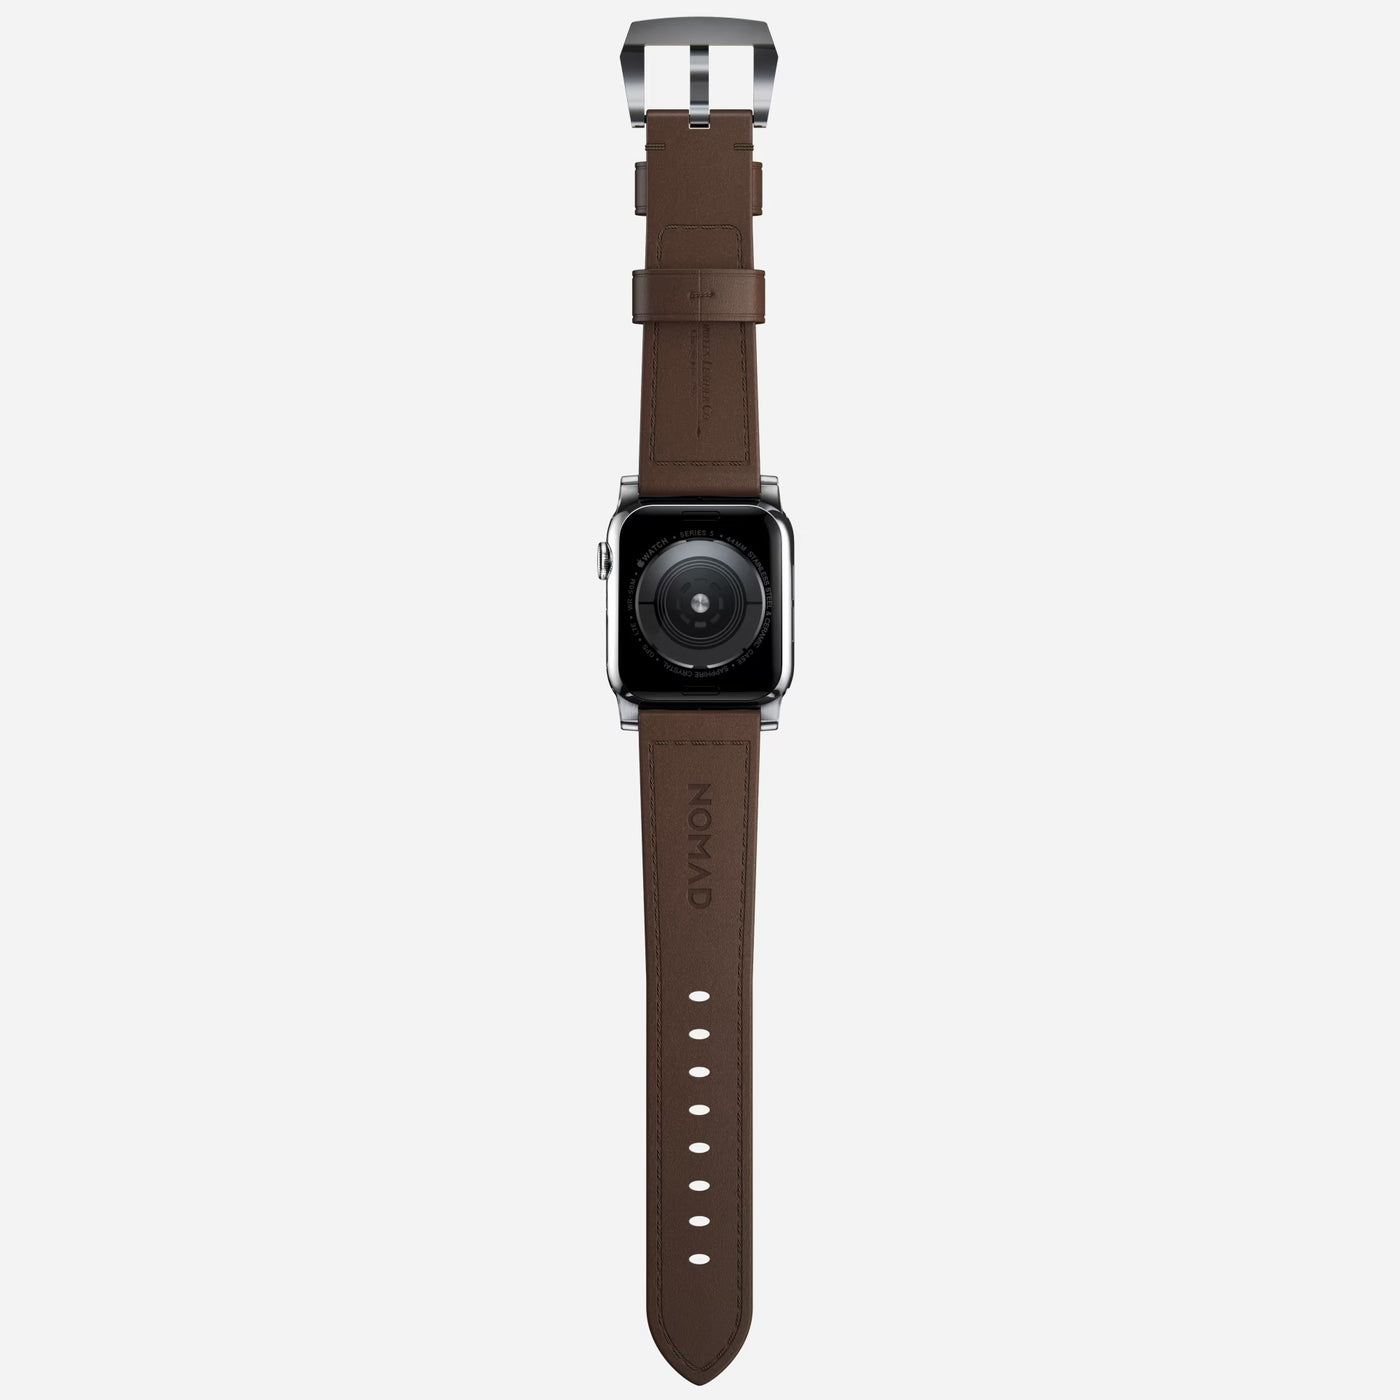 Nomad - Traditional band for Apple Watch